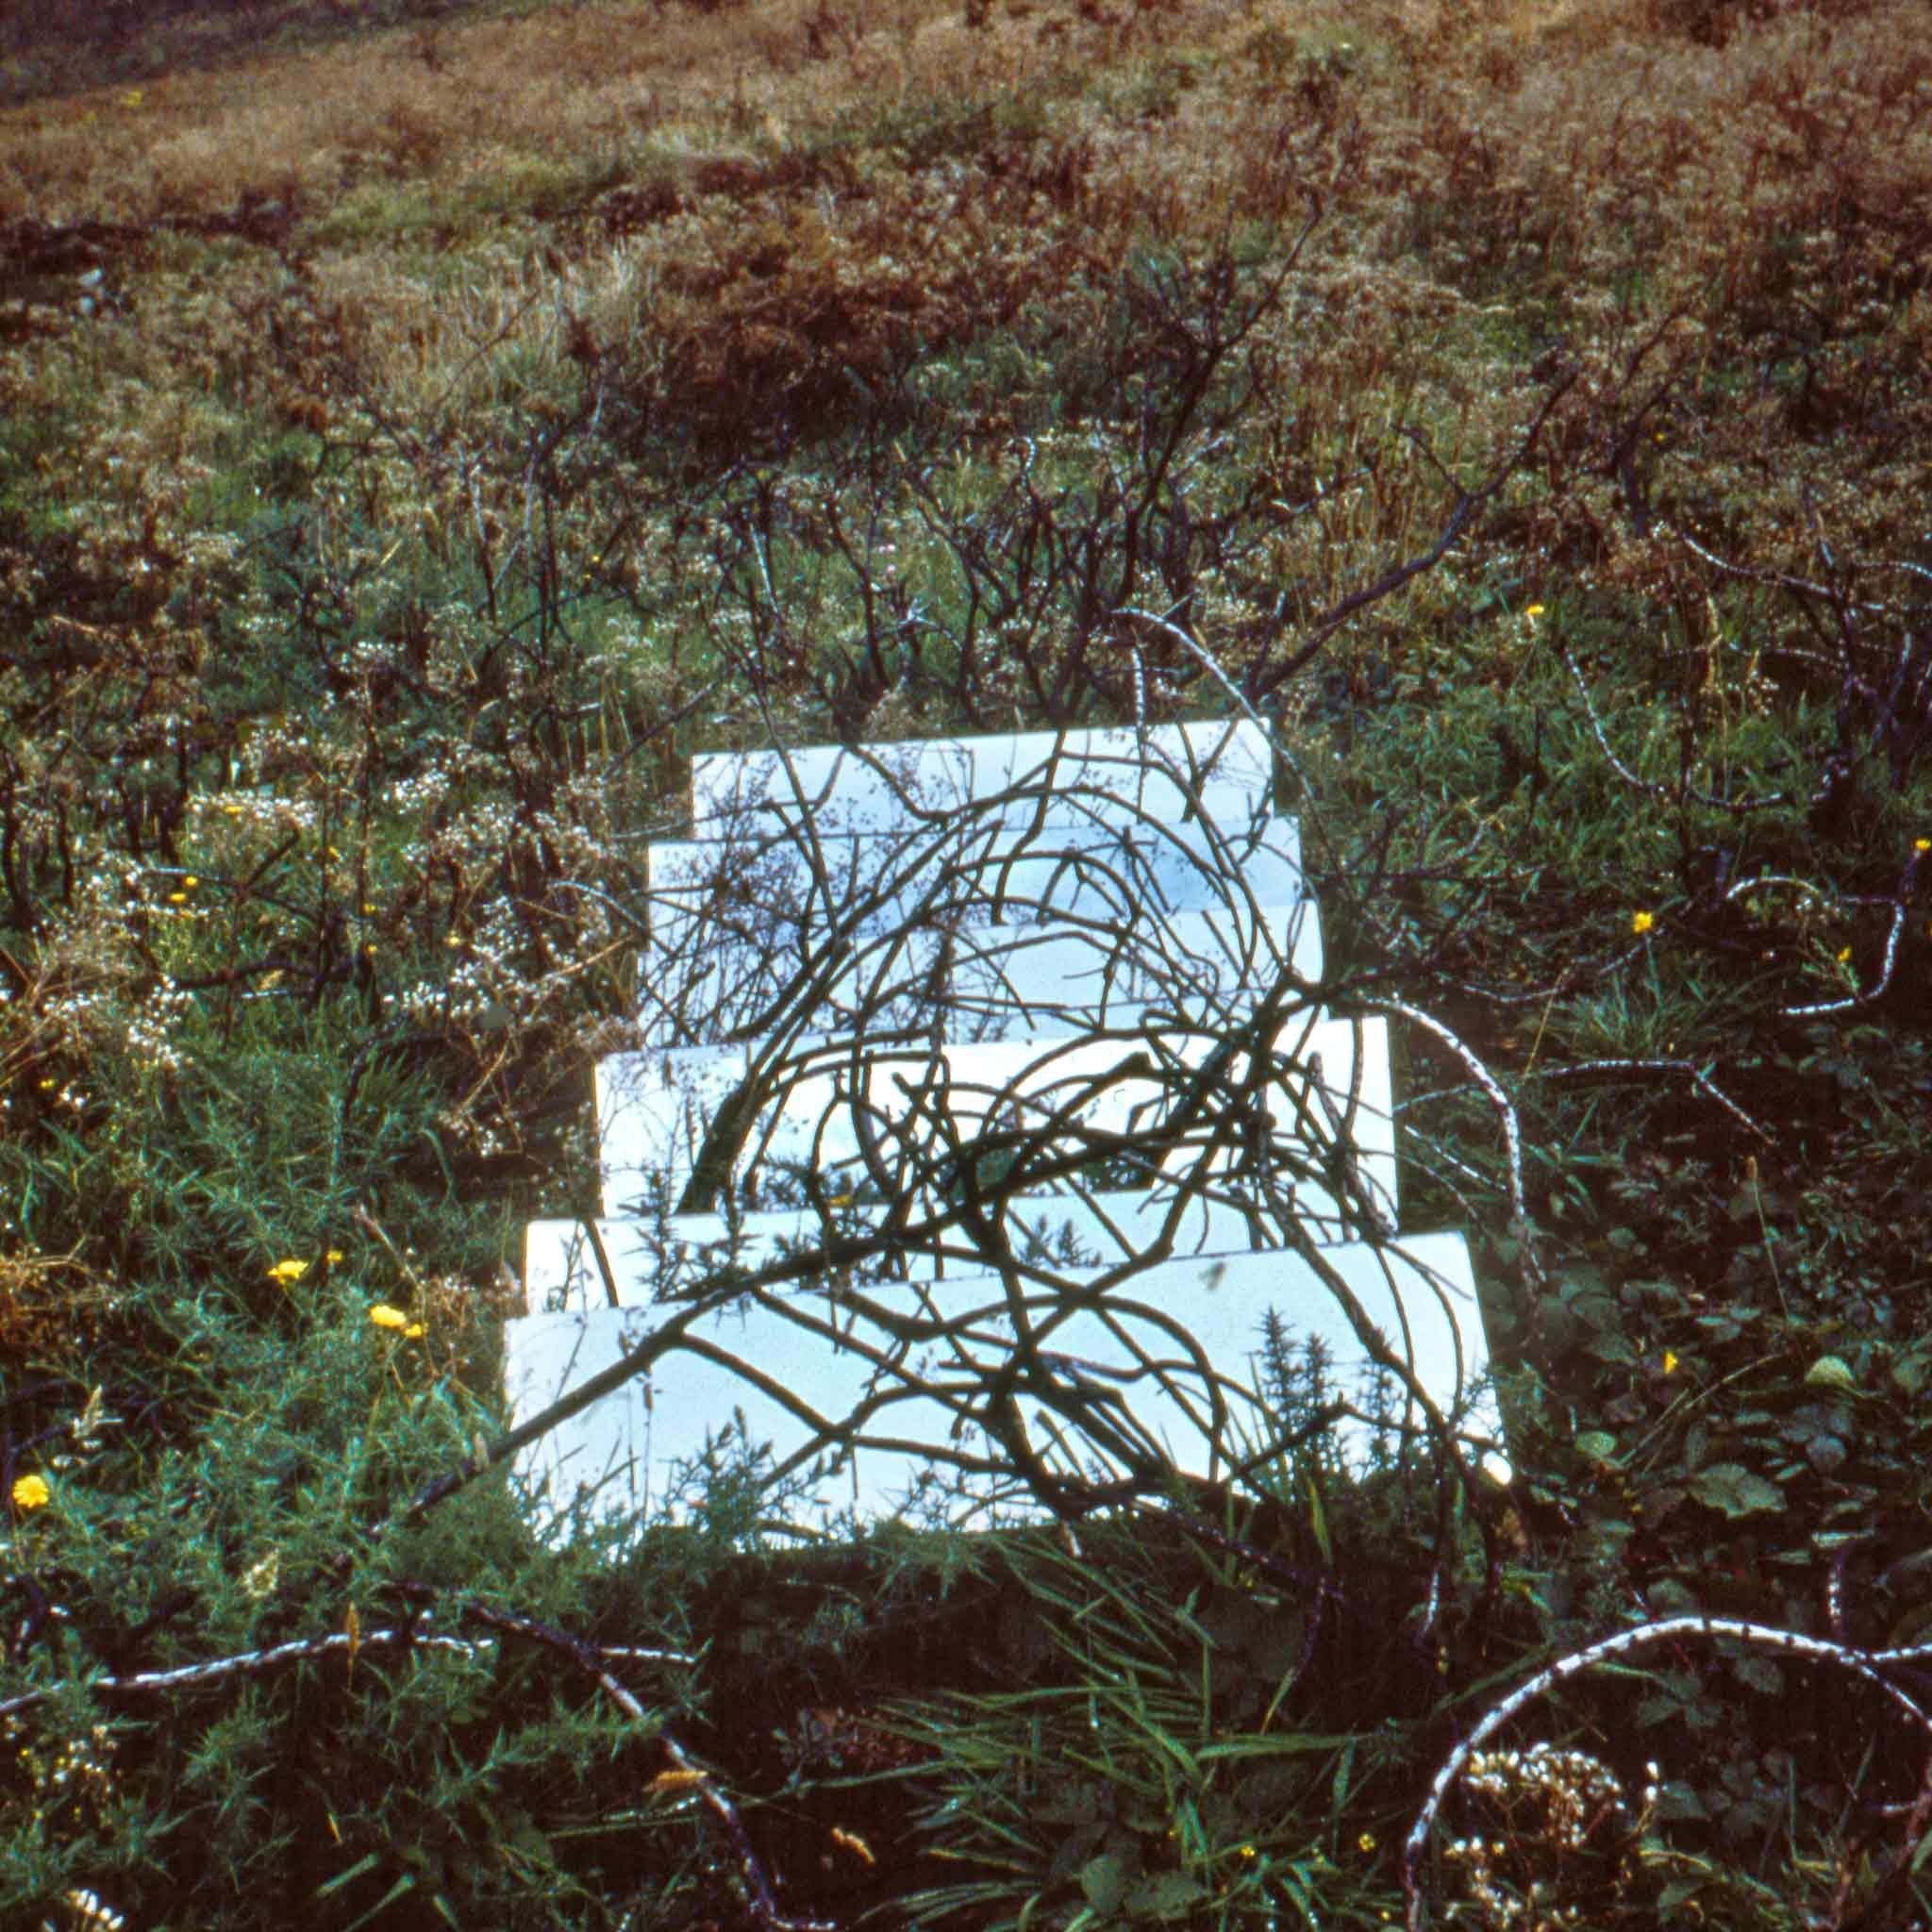 grassy overgrown area with seven mirrors placed on the ground